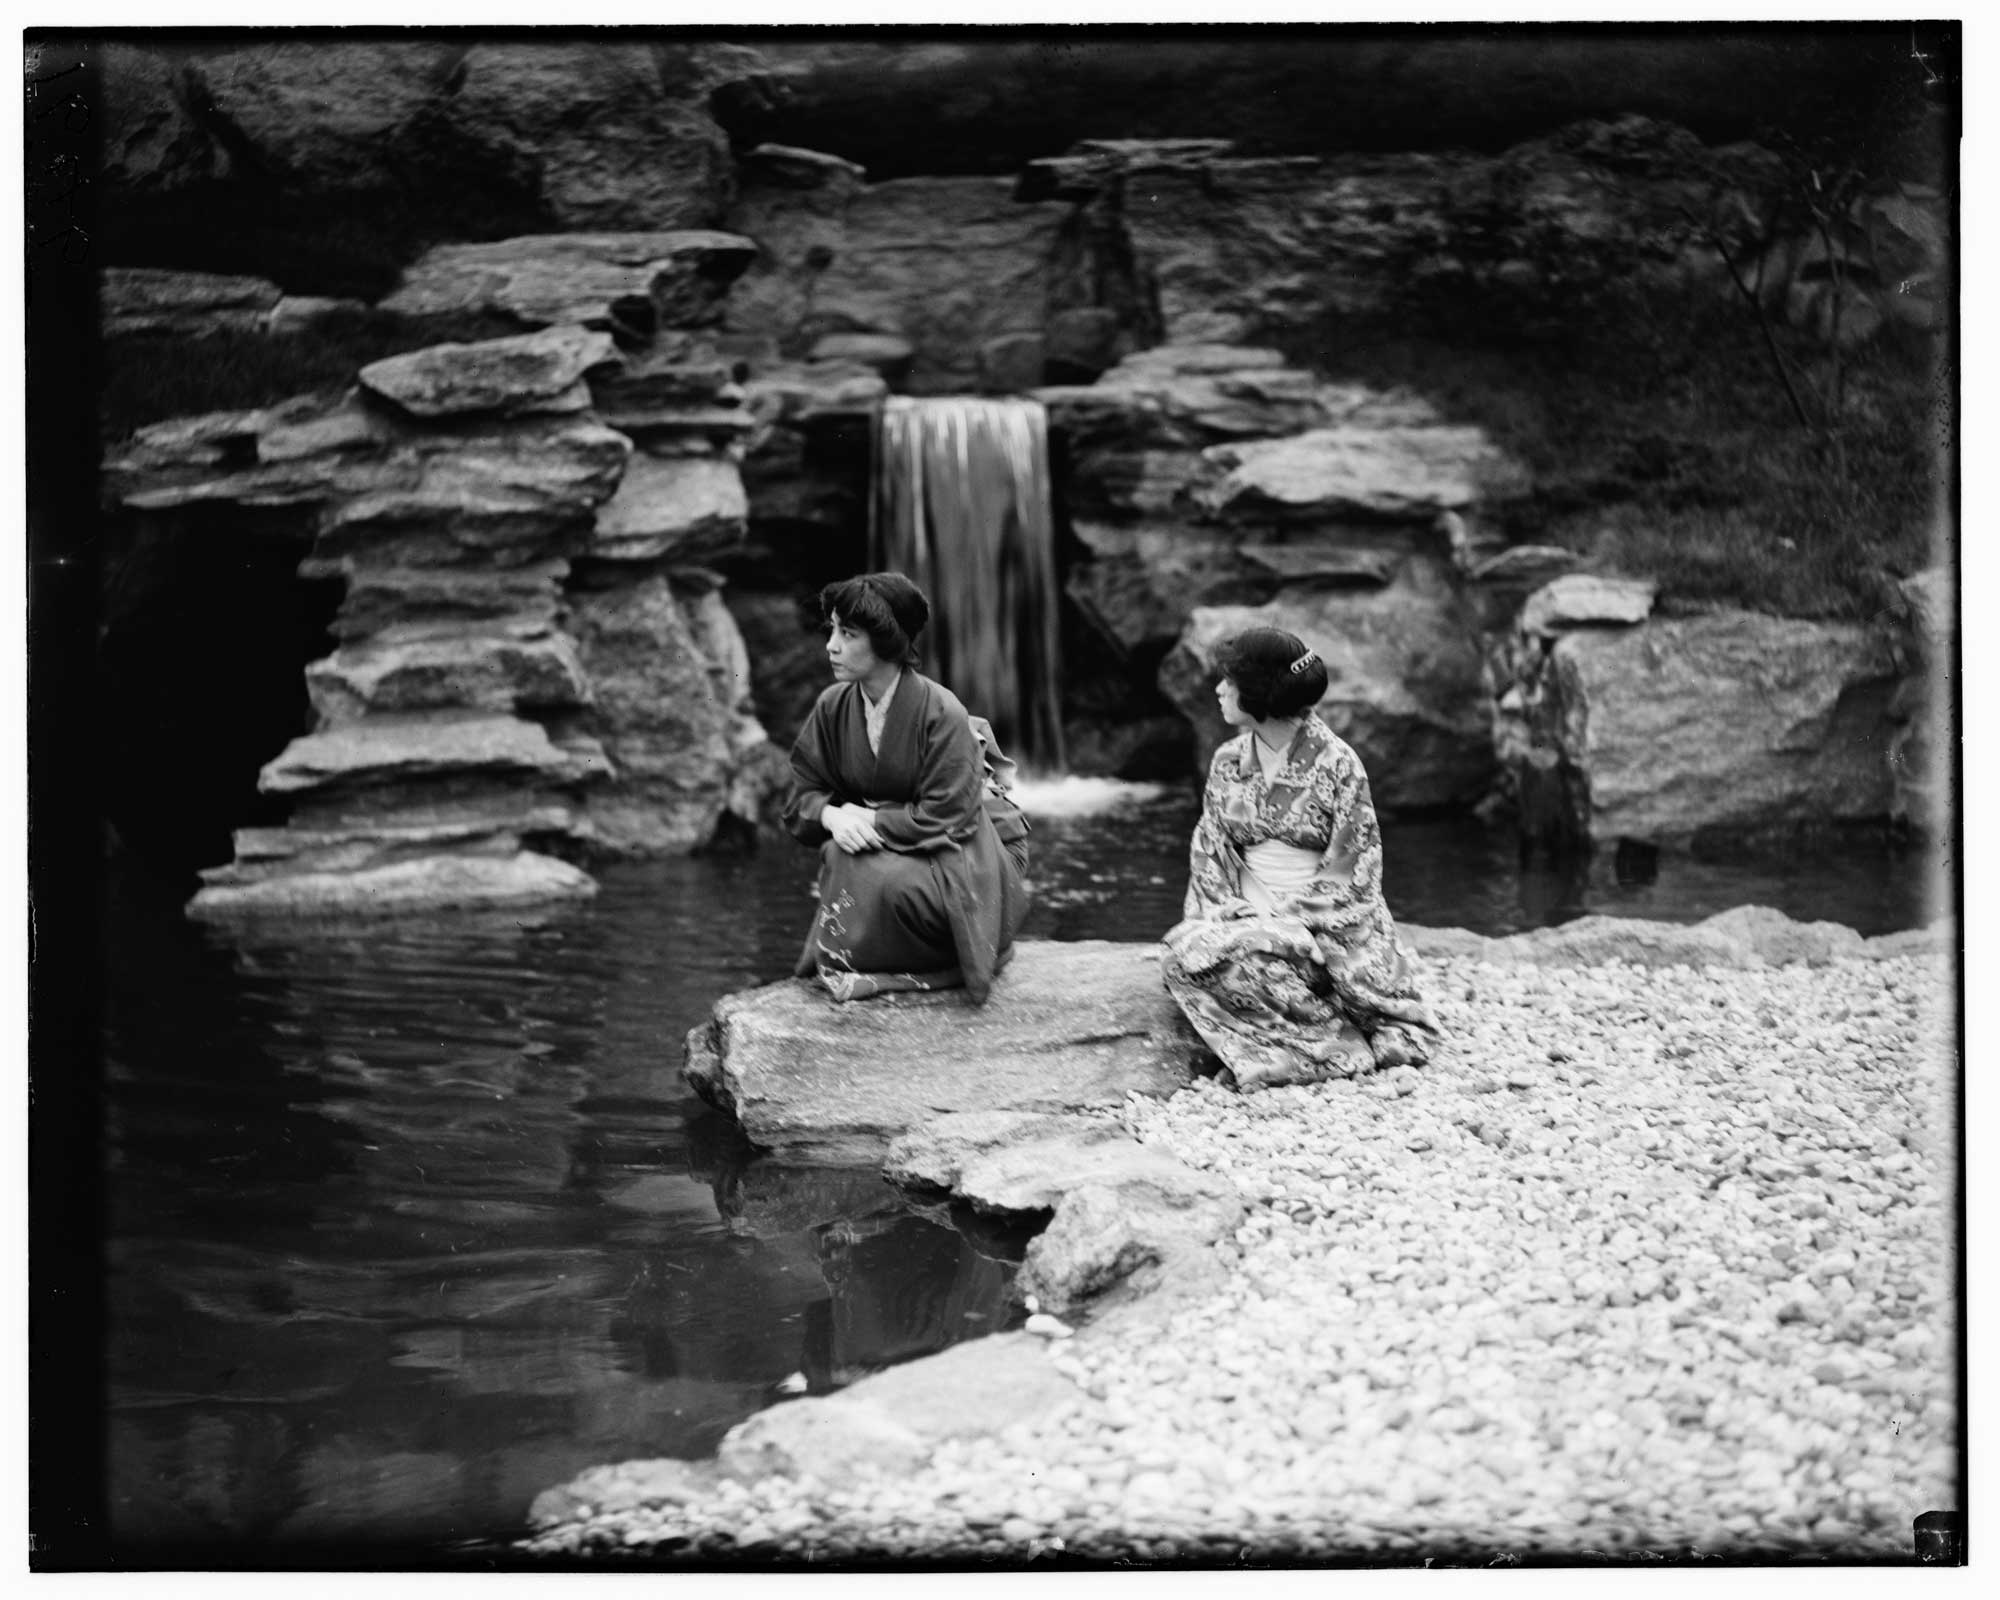 Archival photograph of two Japanese women wearing kimonos in front of a small waterfall.